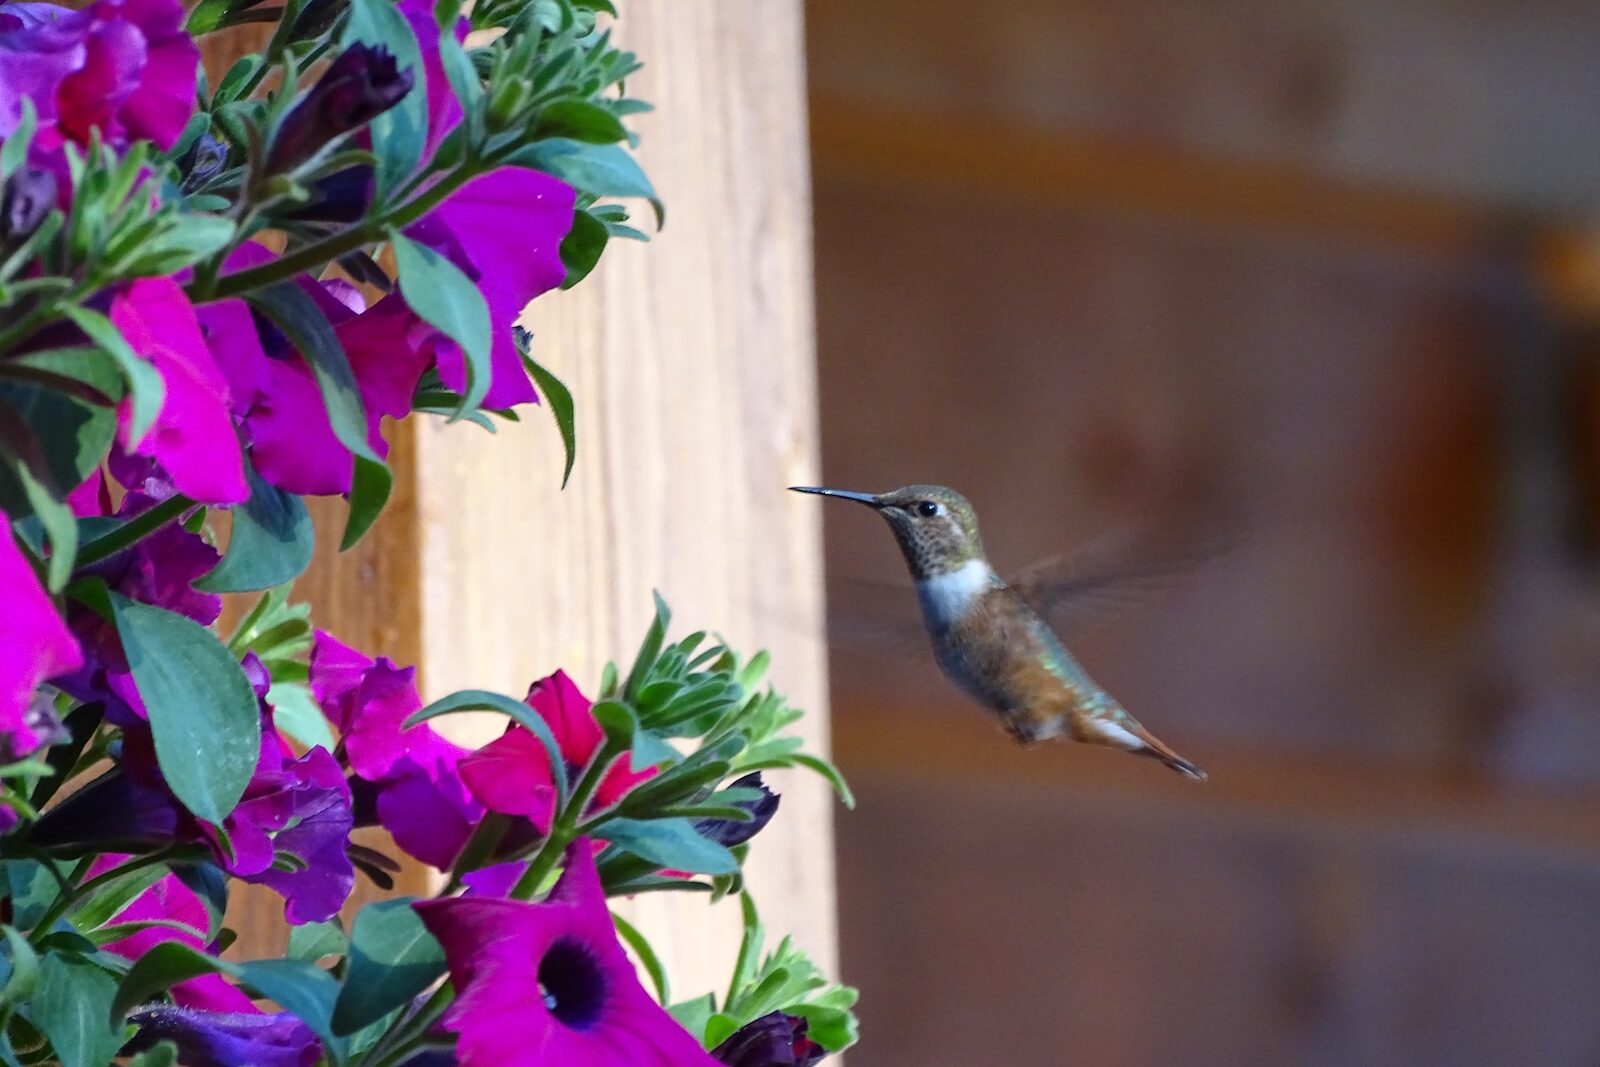 green and brown humming bird flying near purple flowers